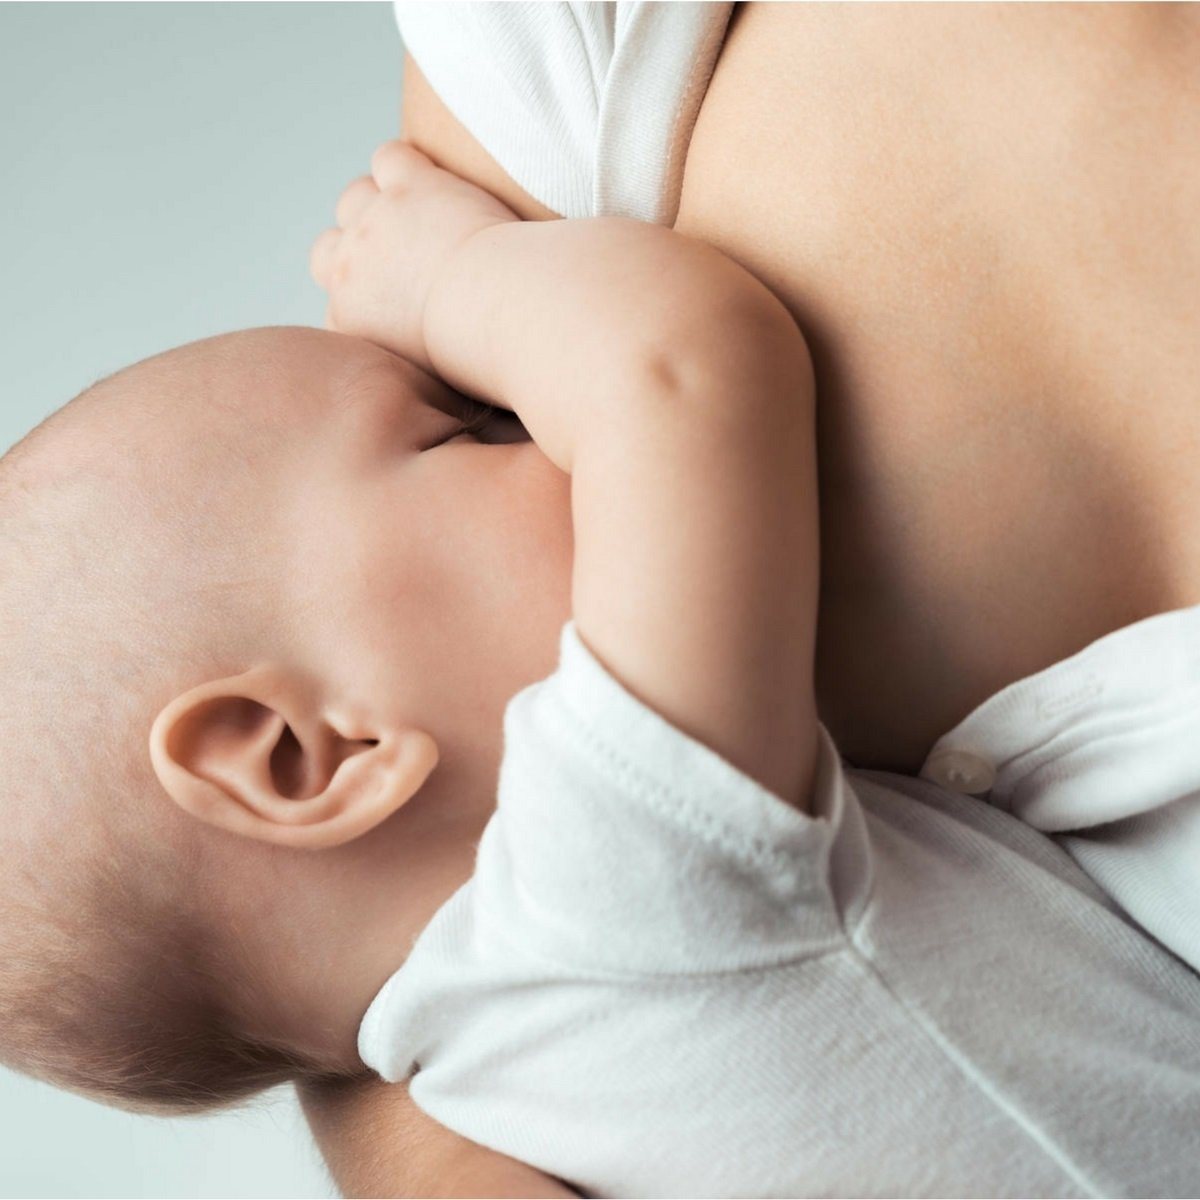 The Truth About What to Avoid During Breastfeeding